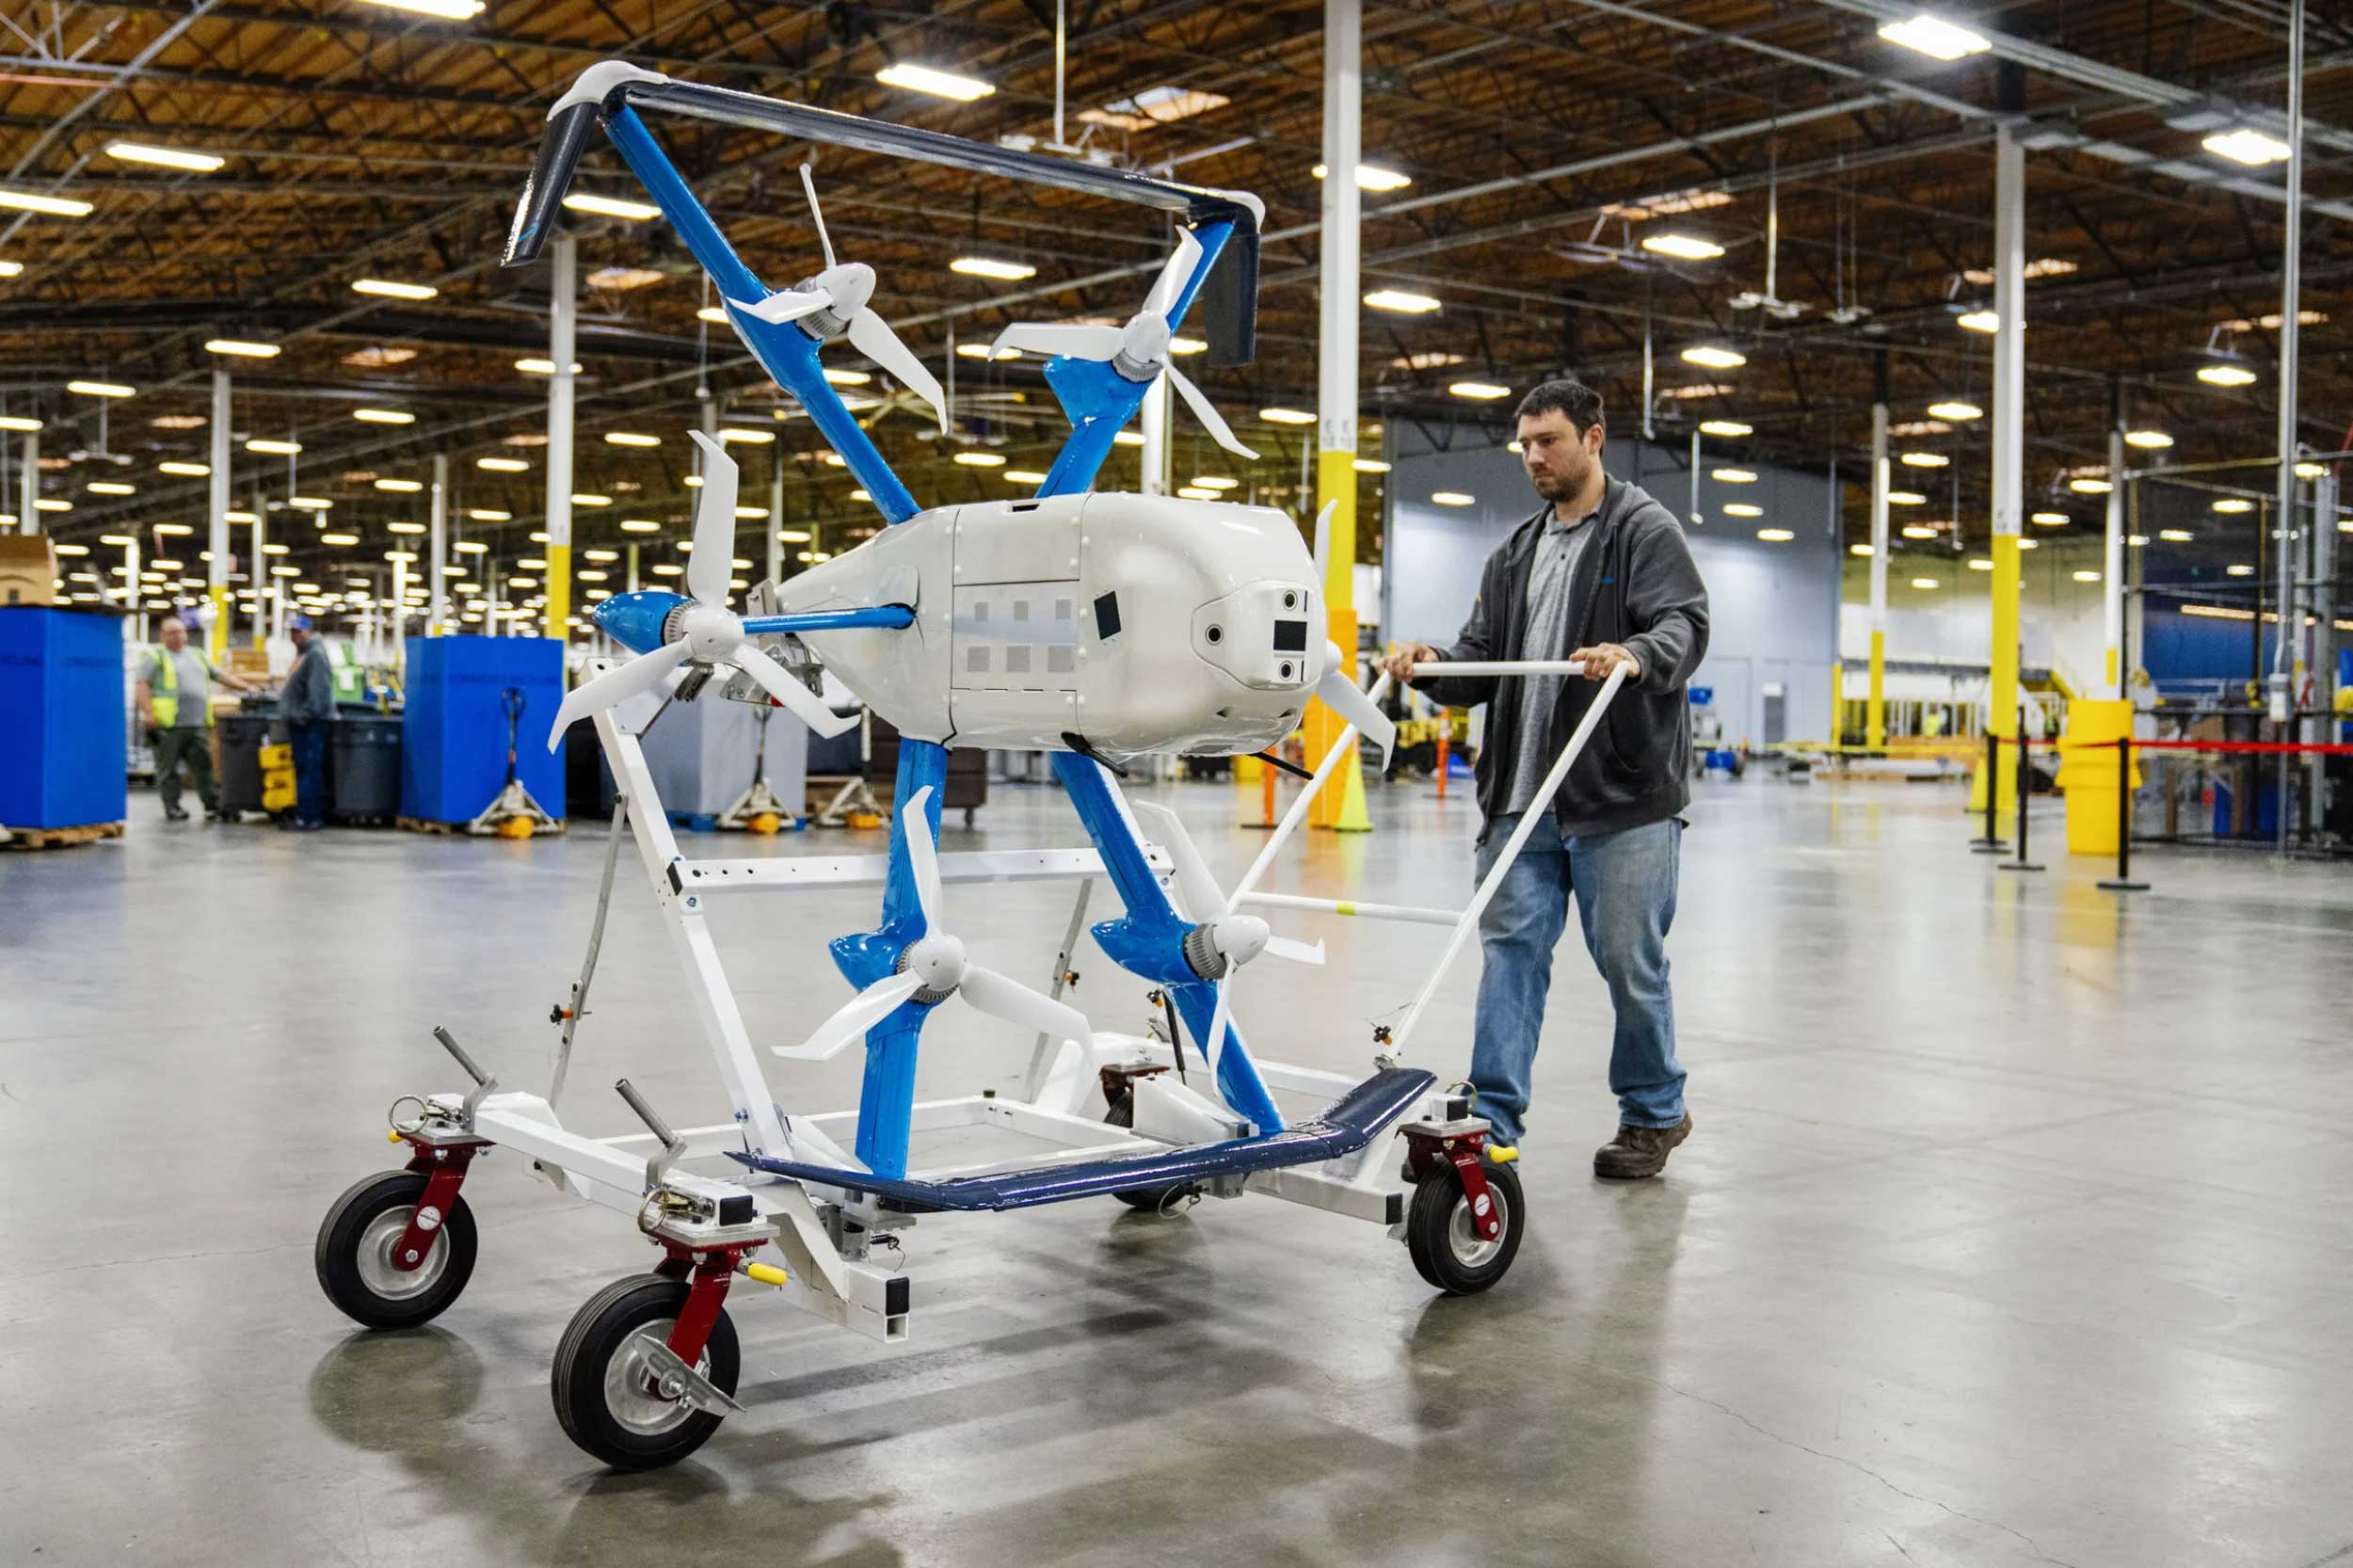 Not yet a part of the sandbox trials, Amazon's new MK30 drone is expected to start delivering purchases in 2024